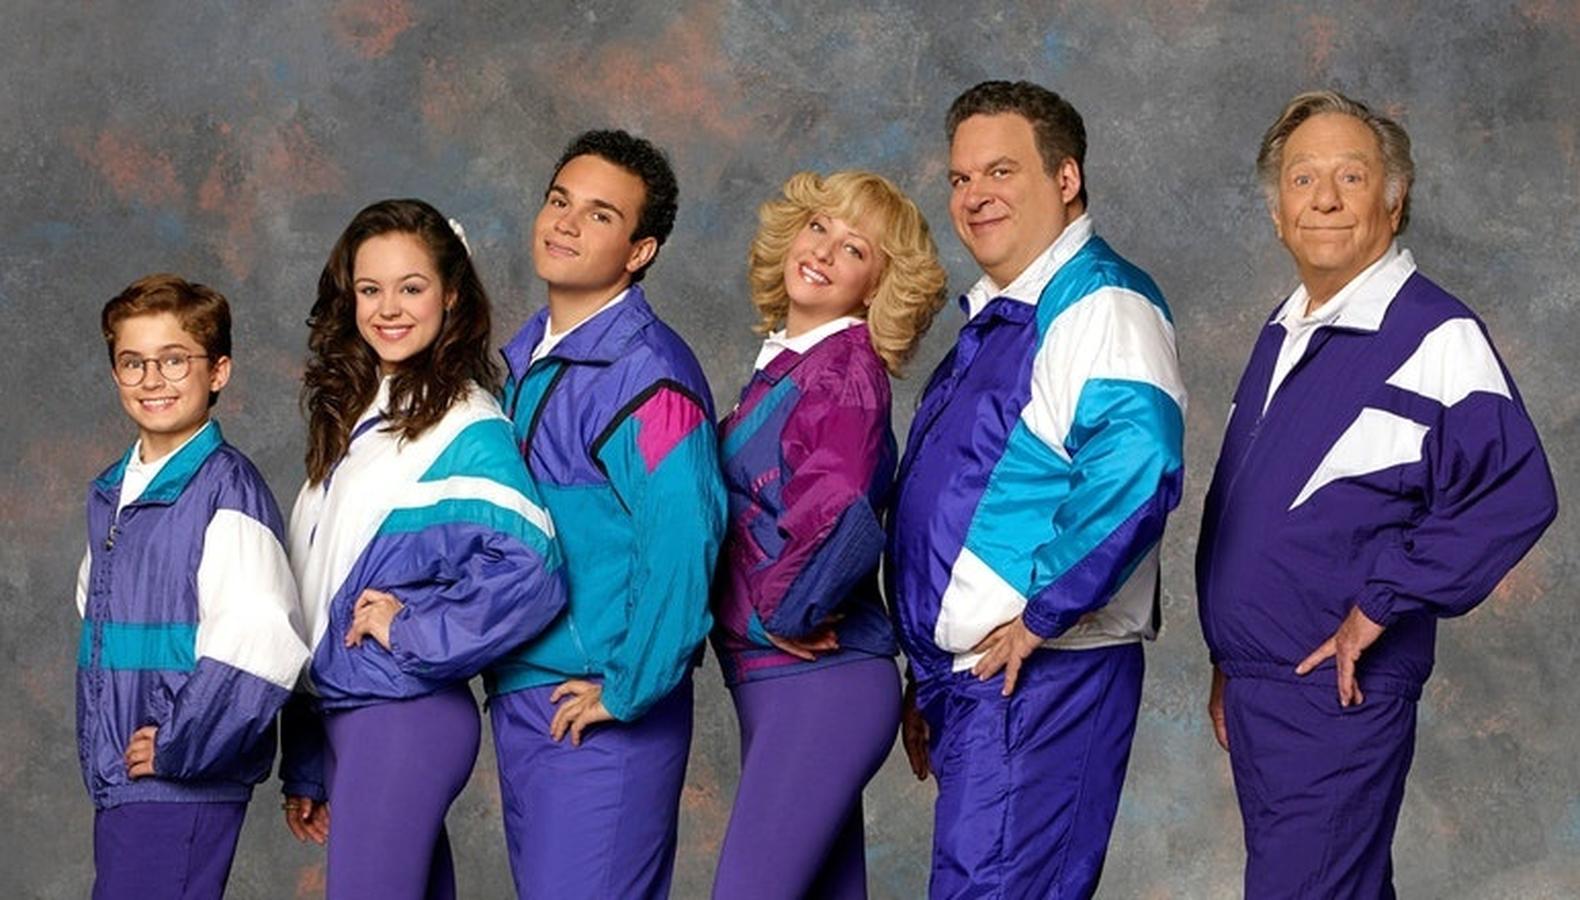 Meet ‘The Goldbergs’ + Other Events L.A. Actors Should Check Out